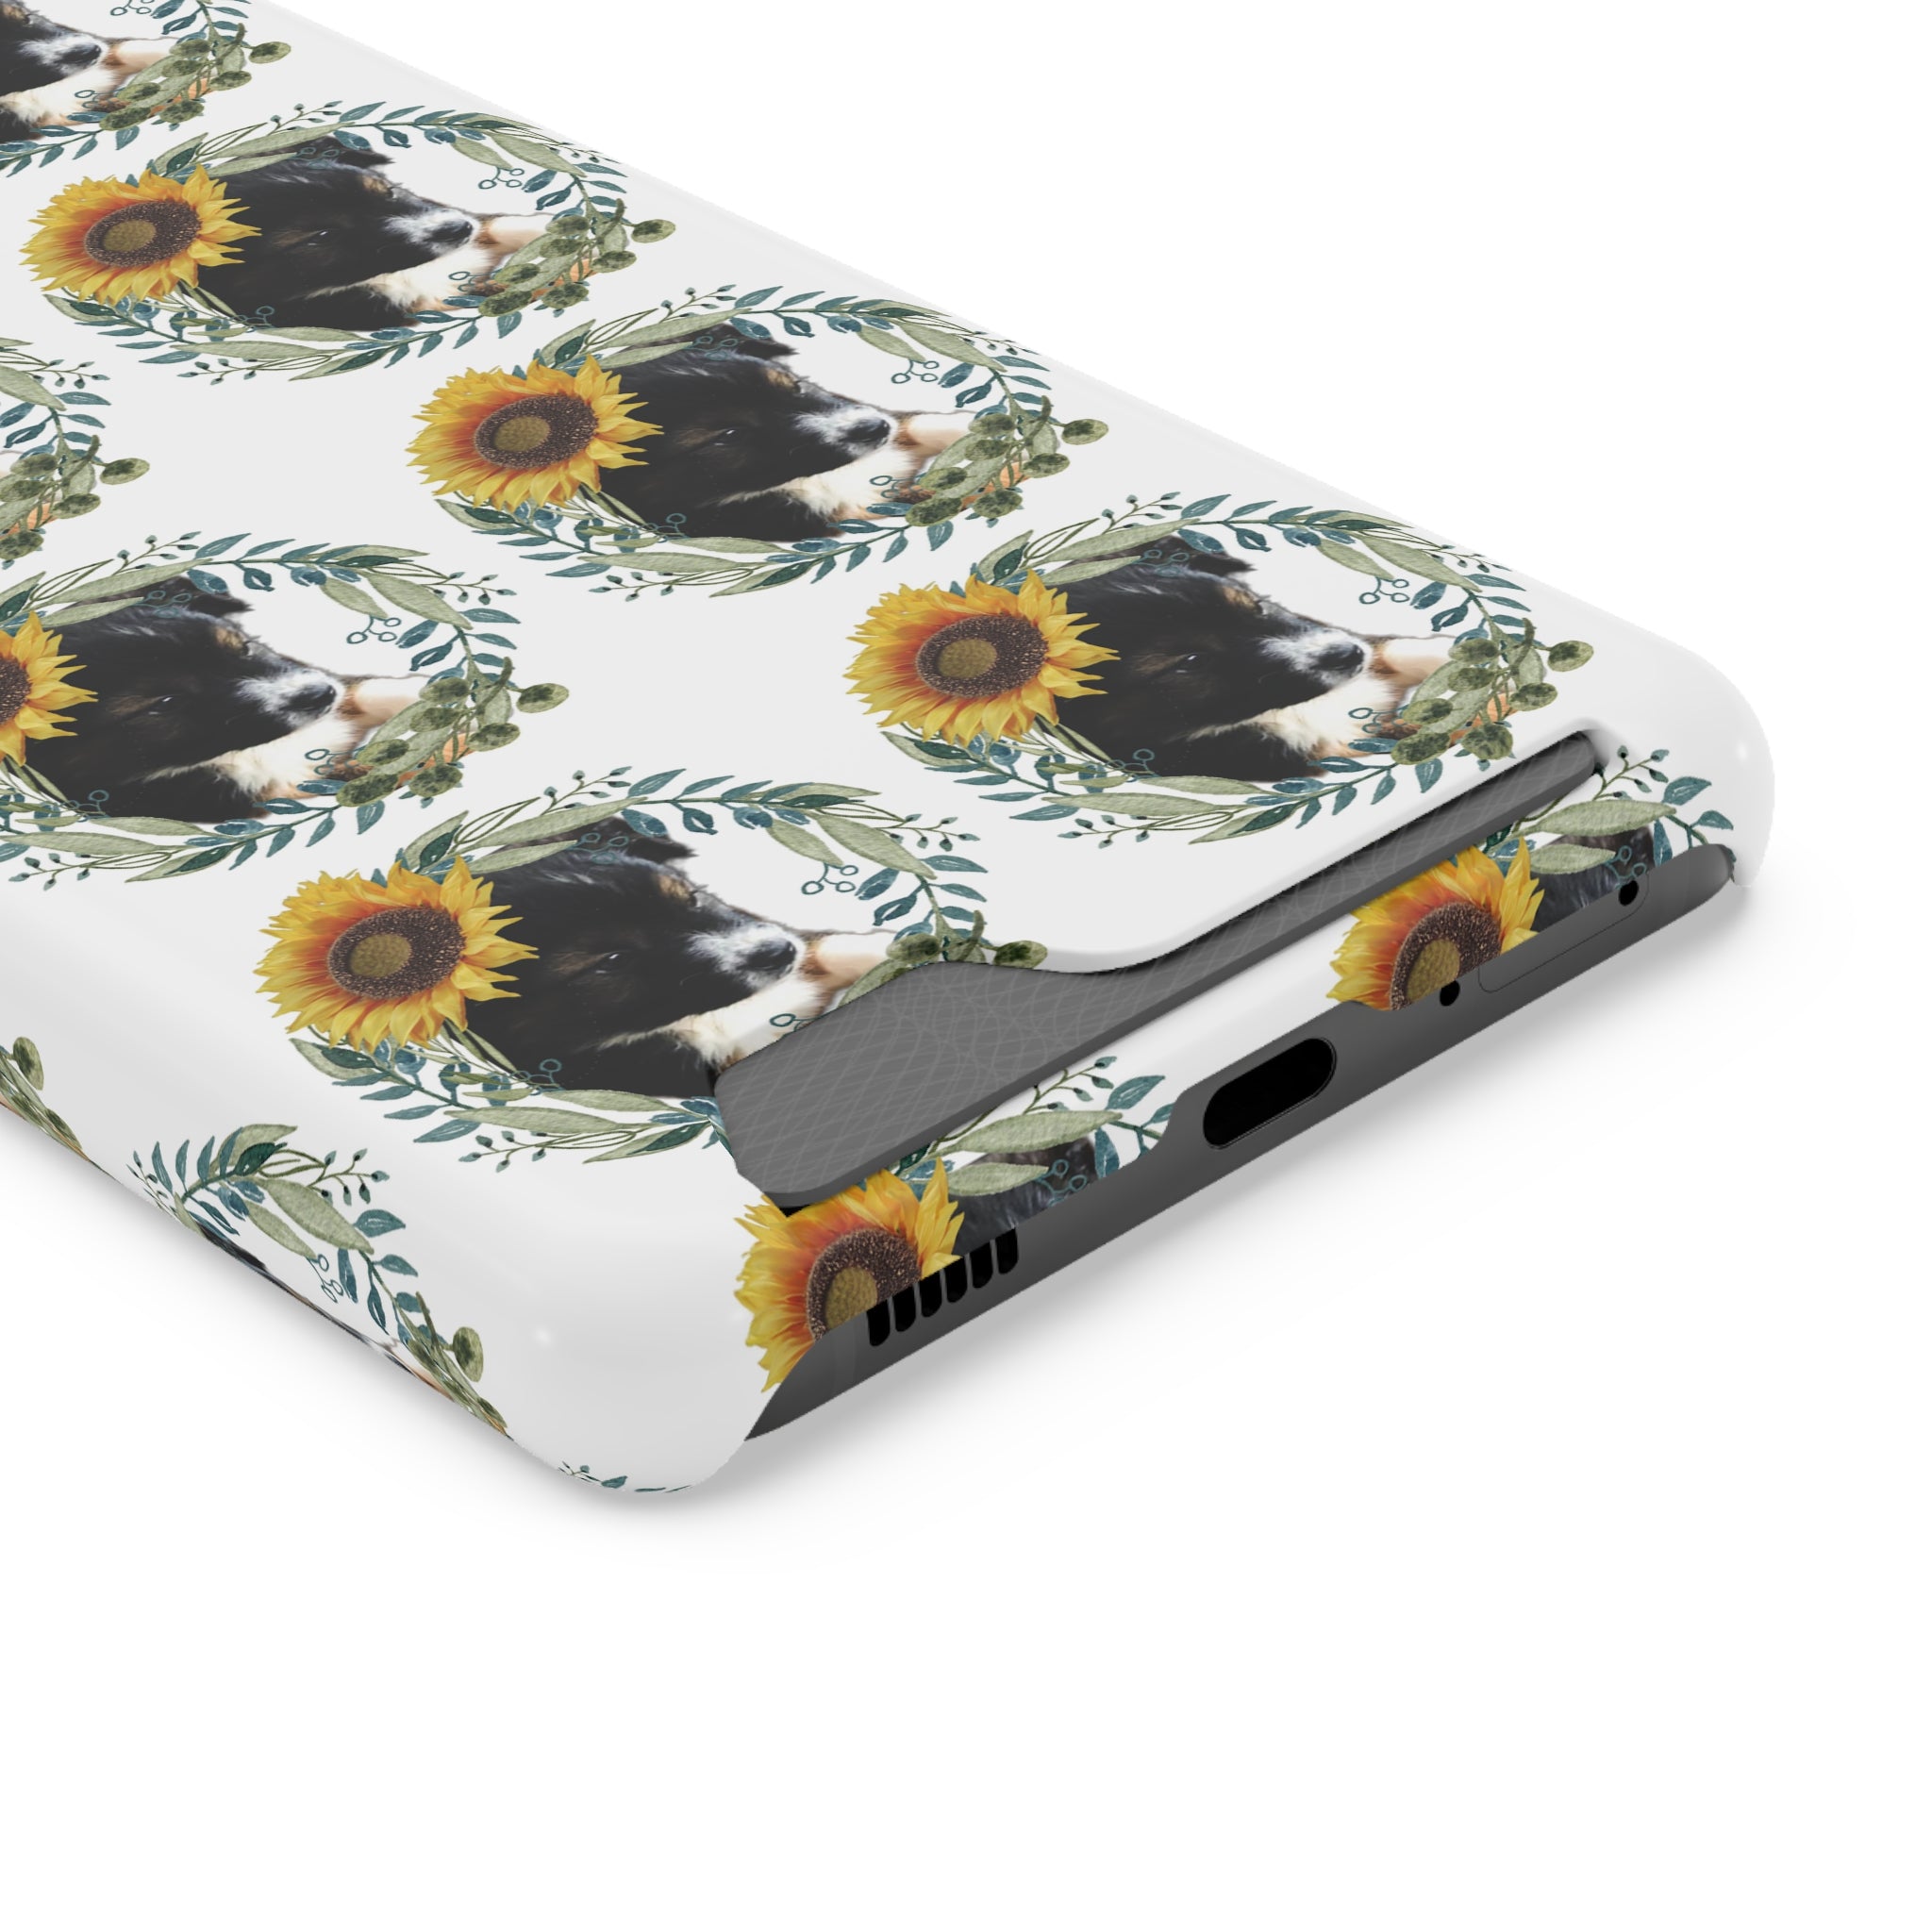 Cute Black Puppy with Sunflowers Phone Case With Card Holder